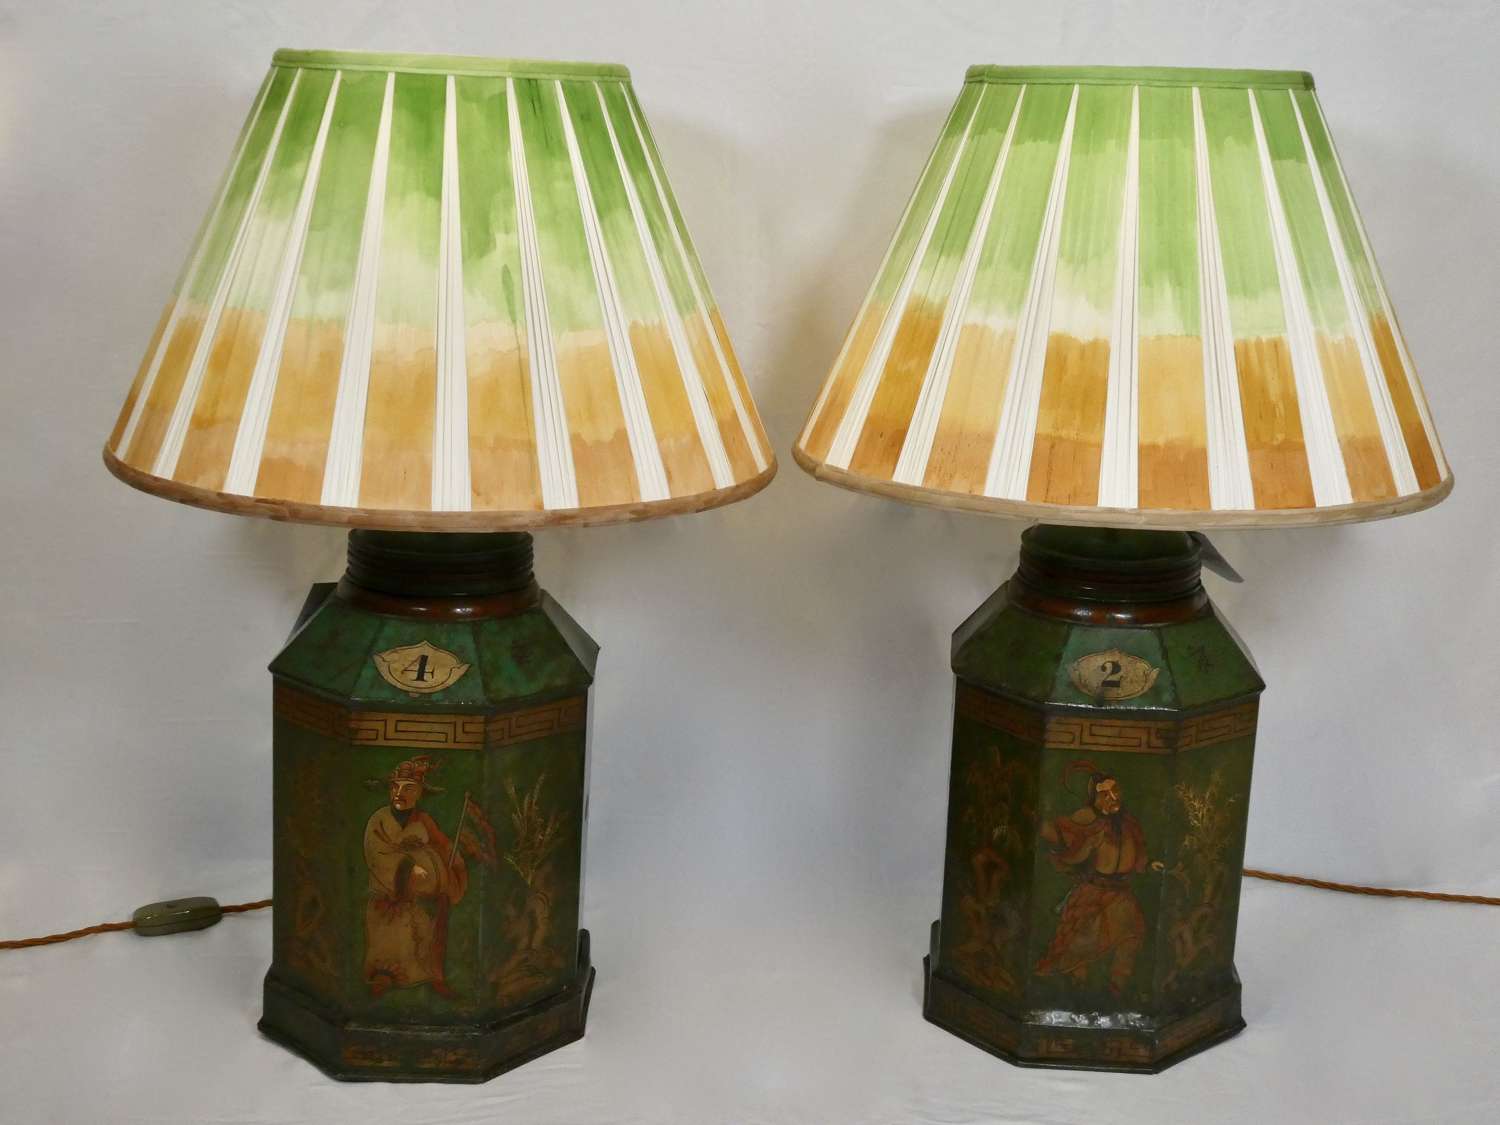 Pair of 19th Century Japanned Tea Canisters Converted to Lamps